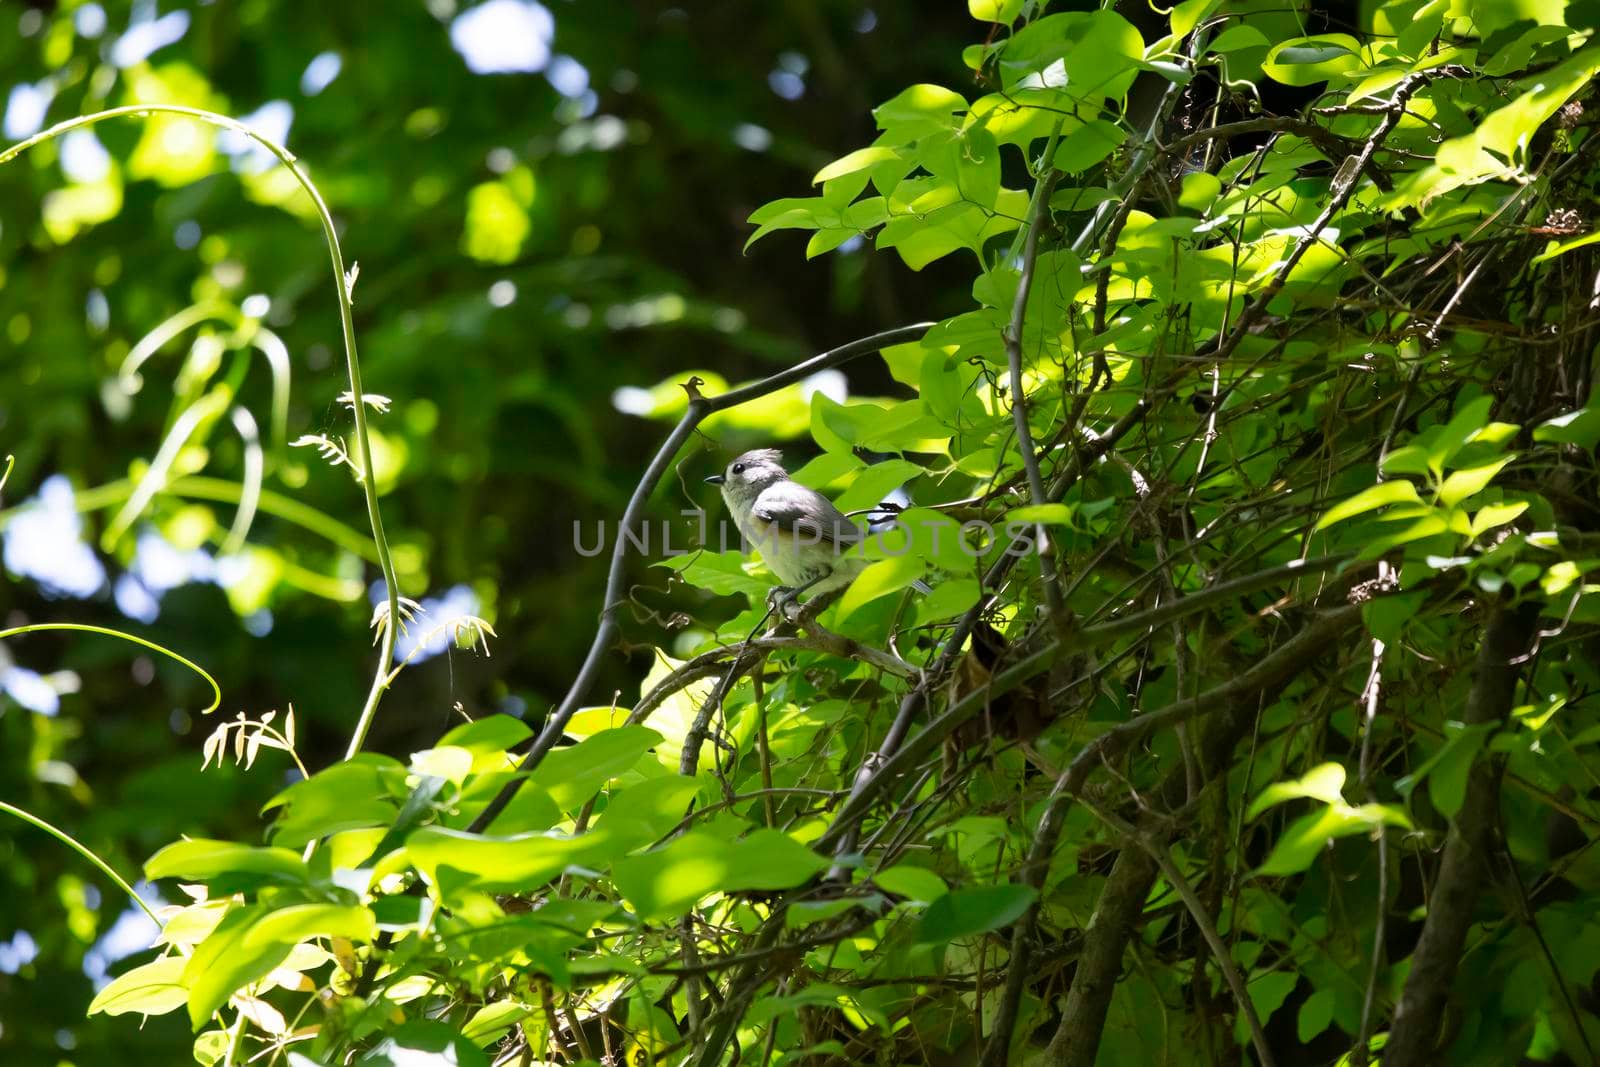 Tufted titmouse (Baeolophus bicolor) looking around majestically from its perch on a tree branch